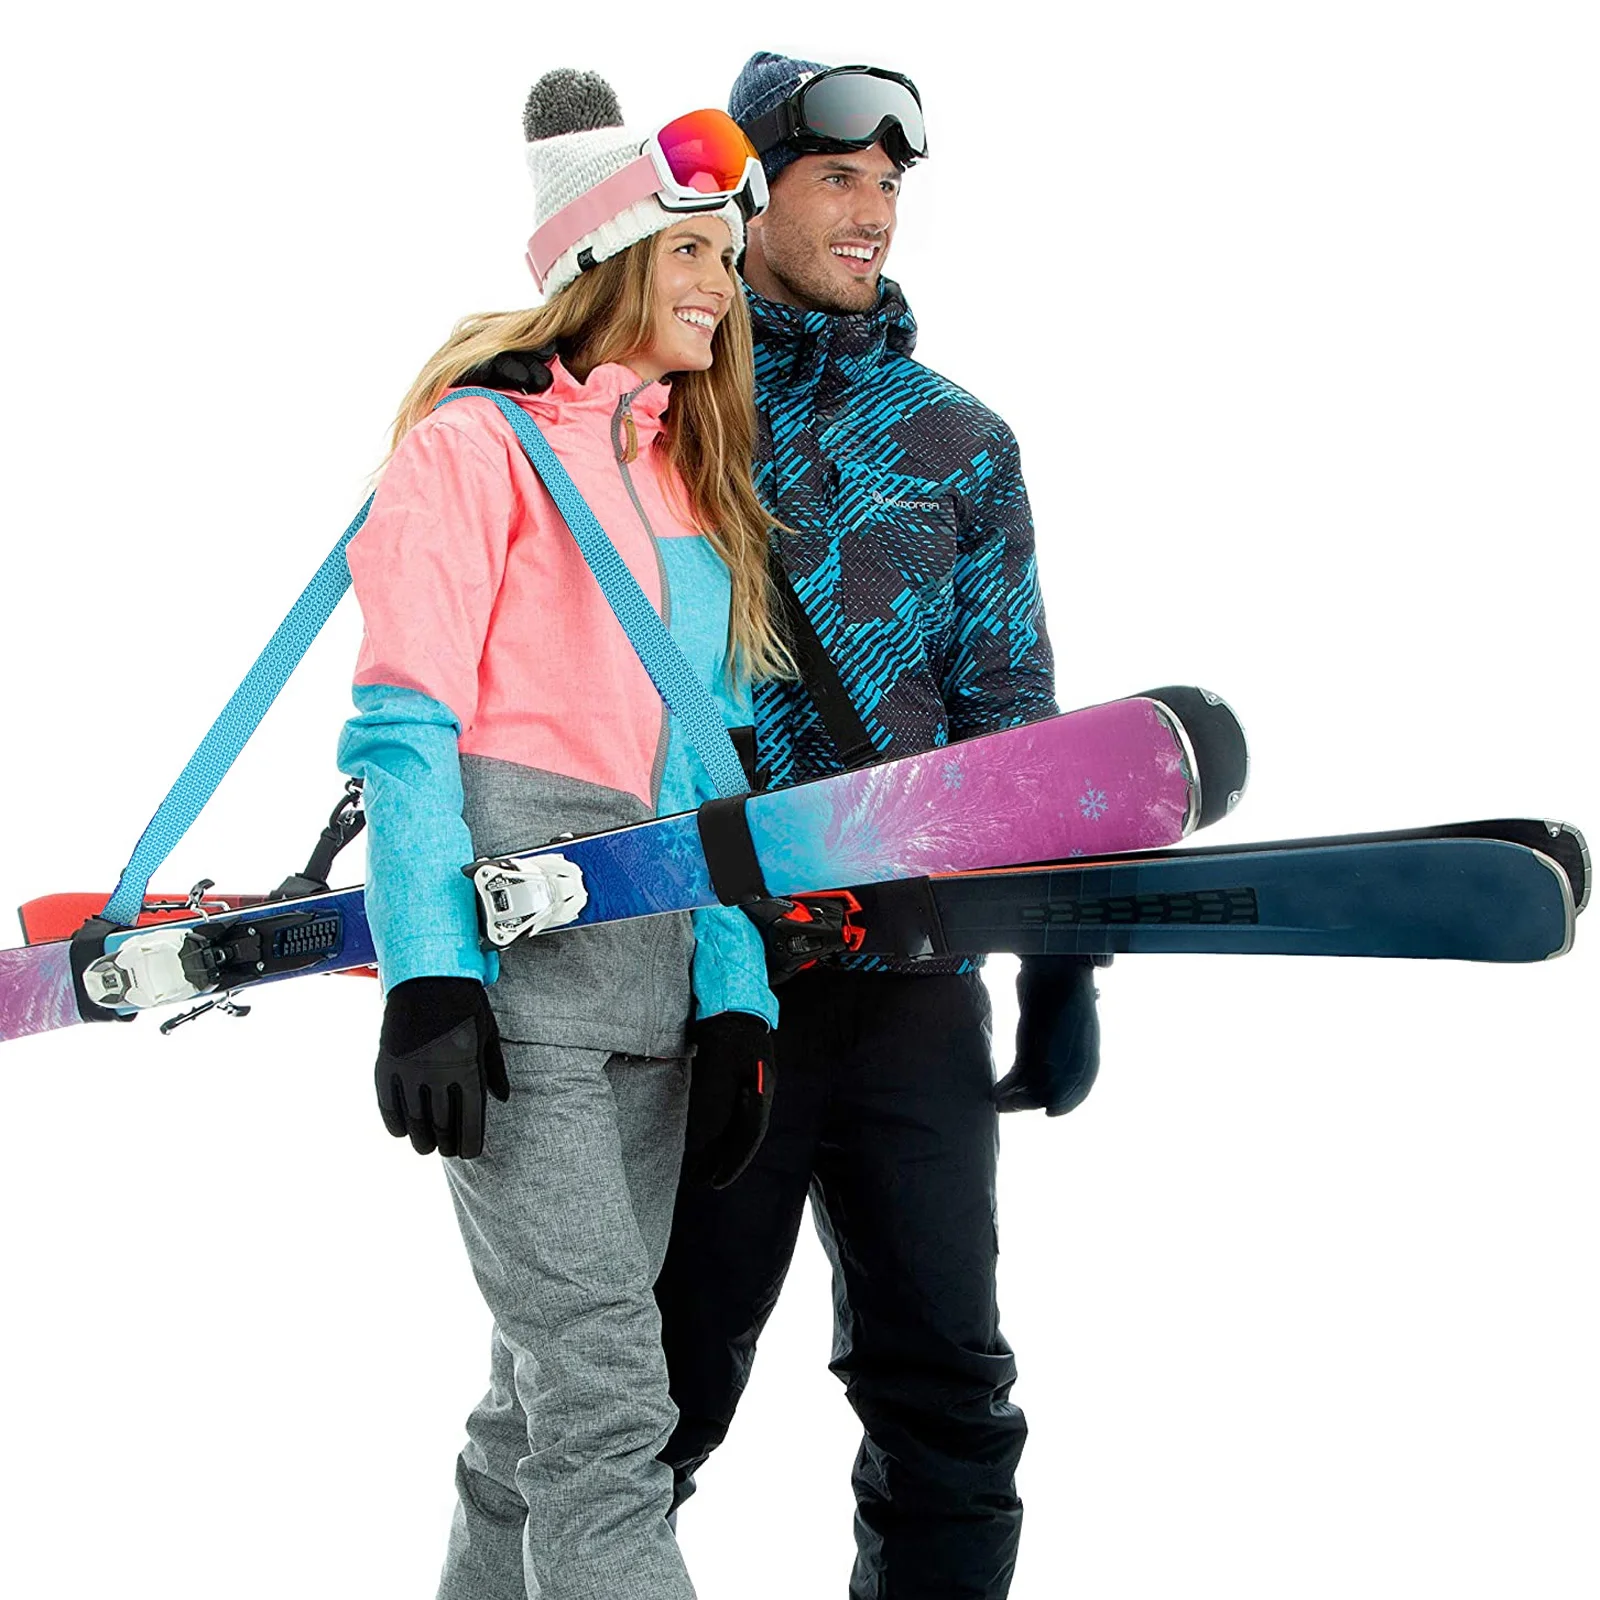 

Snowboard Shoulder Strap Adjustable Straps The Carry Ski Carrying Supply Portable Polyester Blend Fixing Band